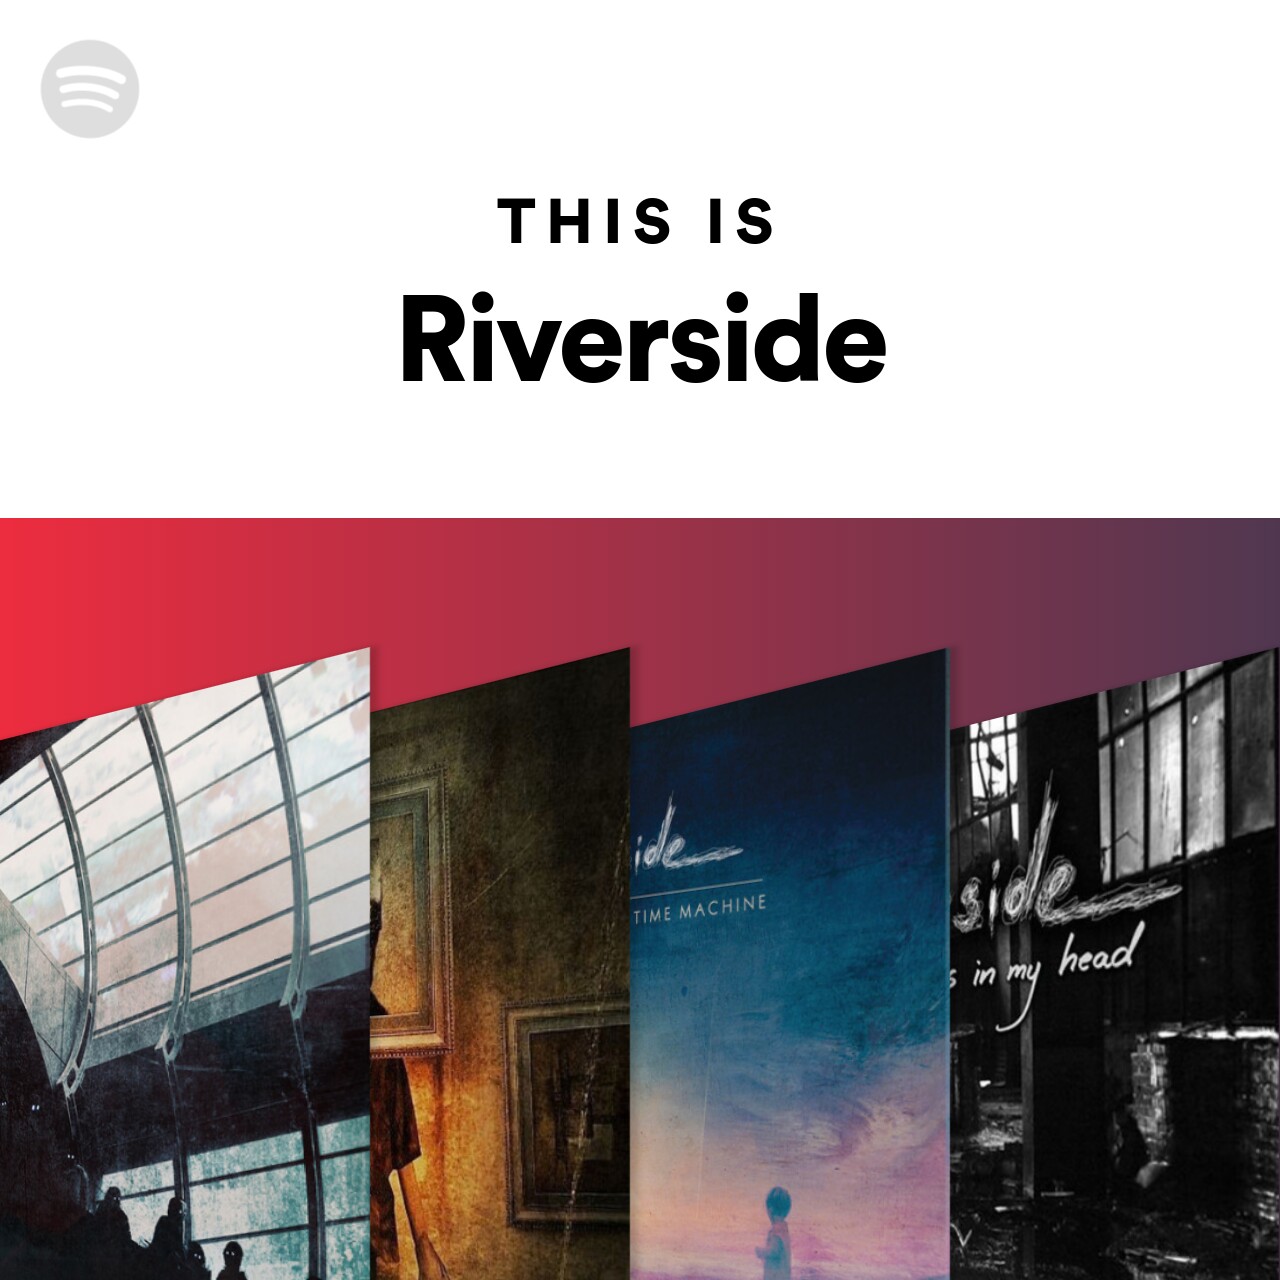 This is Riverside